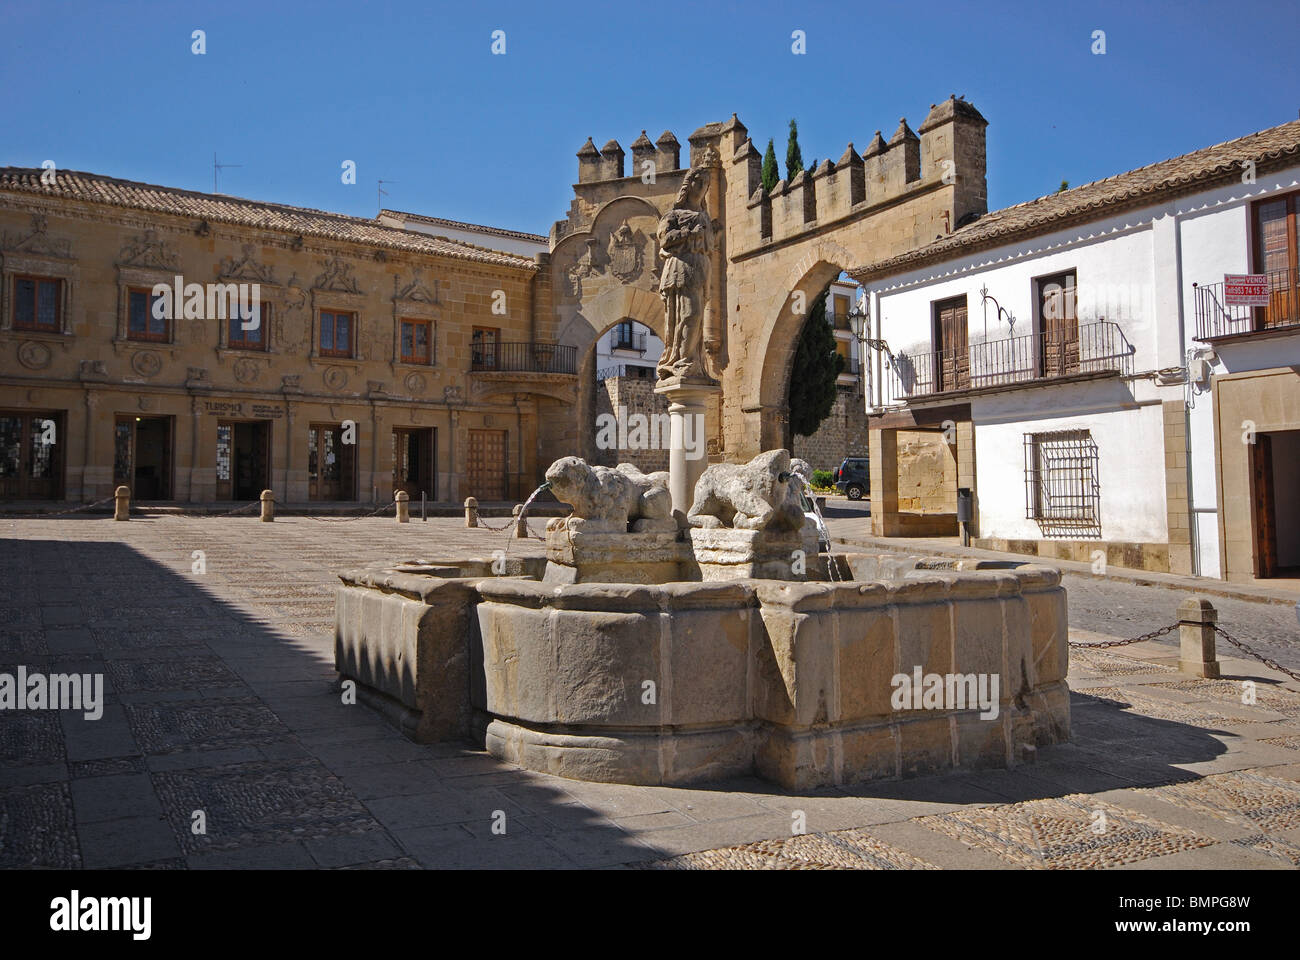 Fountain of the lions, Plaza de Populo (also called Plaza los Leones), Baeza,  Jaen Province, Andalucia, Spain, Western Europe Stock Photo - Alamy